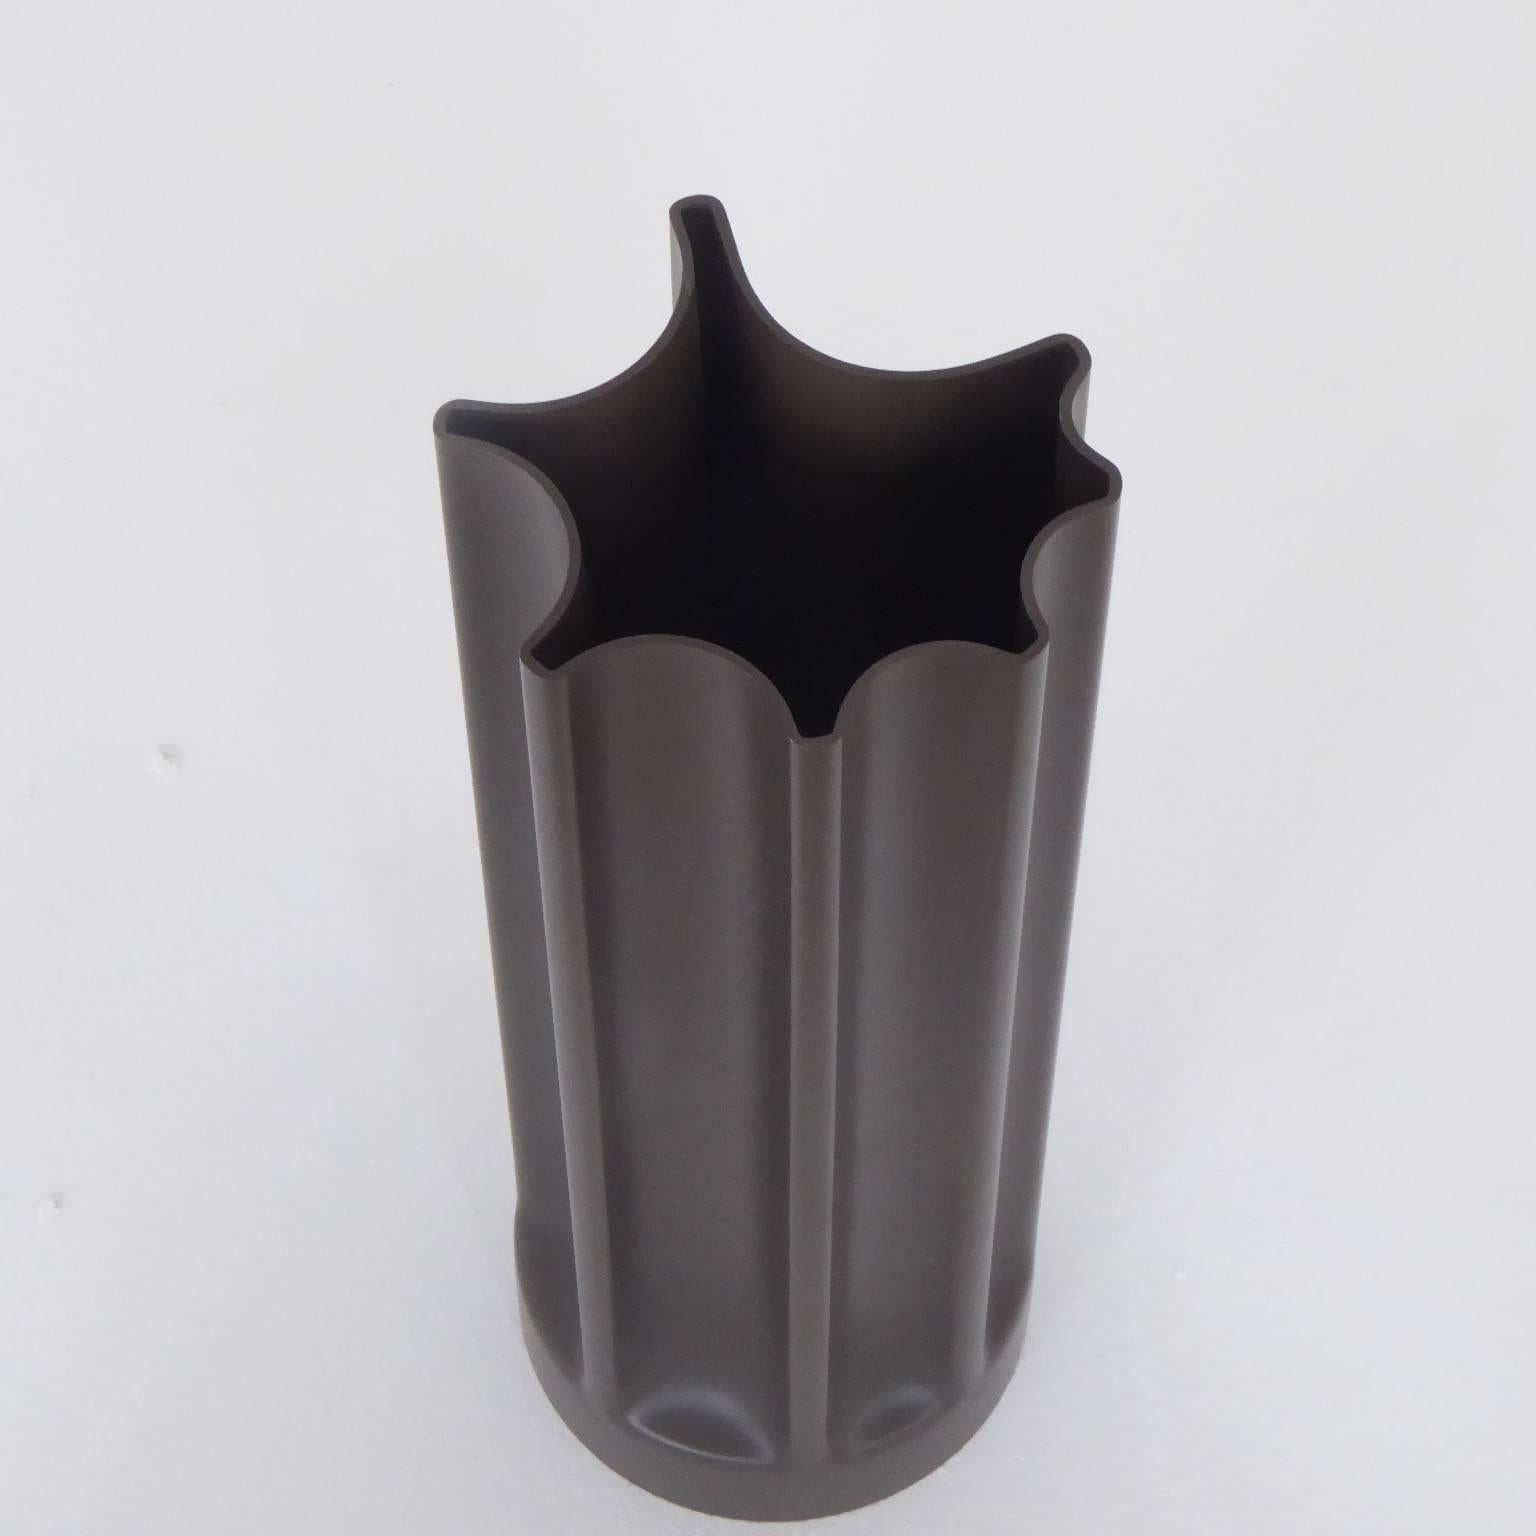 Vase from the Bambu Series, designed by Enzo Mari for Danese Milano. The Bambu Series contains five Models, made by pressure casting tubes of PVC. Black. This is the third highest model. Signed: Made in Italy, Danese Milano, Enzo Mari 1969.